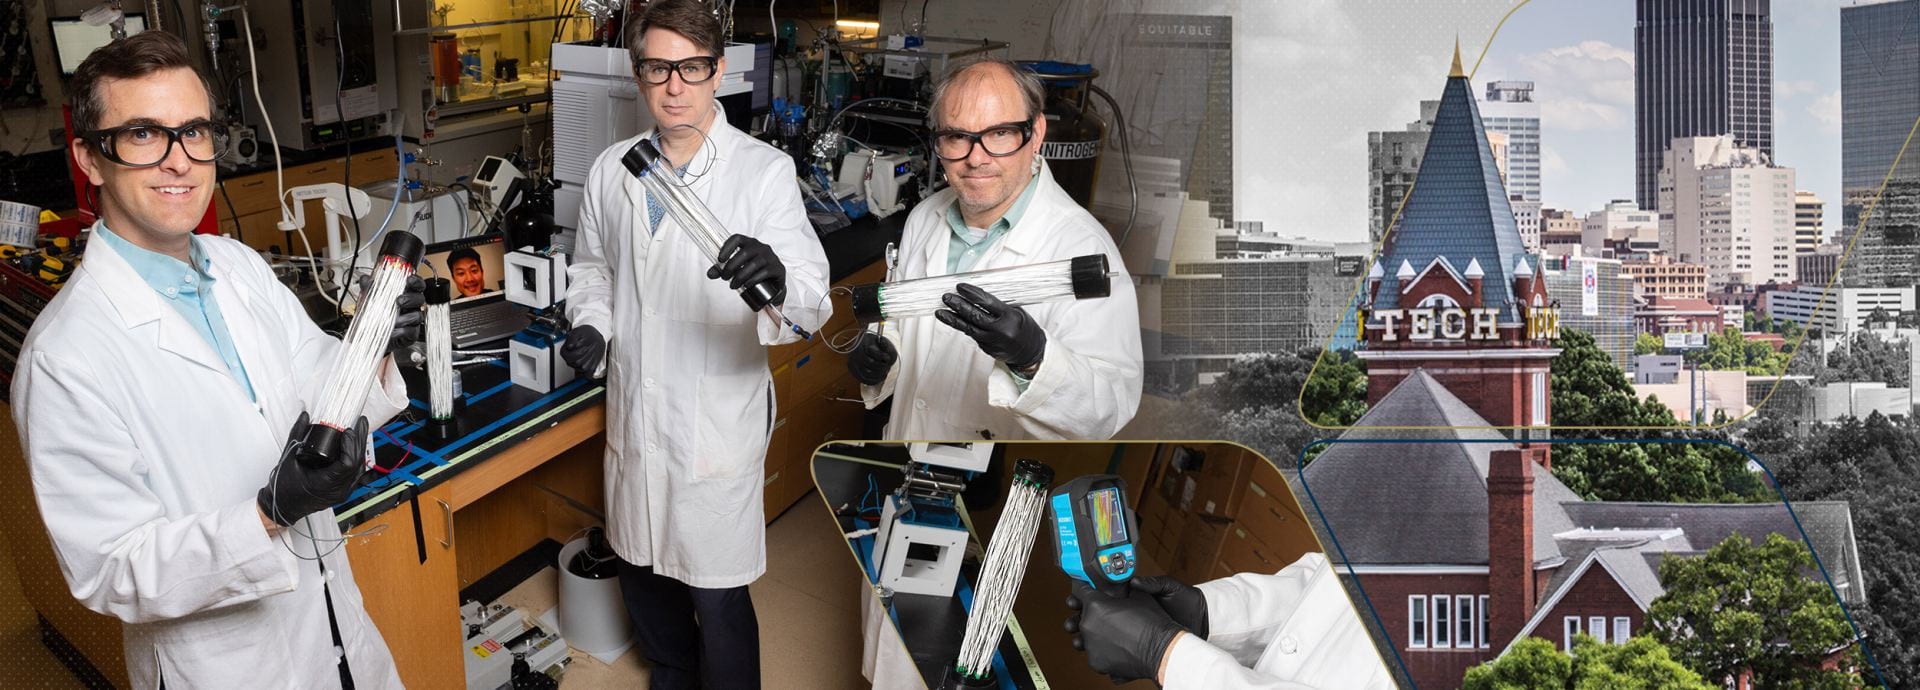 Collage image of three researchers in the lab, the Georgia Tech Tower, with the Atlanta skyline, and a closeup of a researcher’s hands working in another lab.